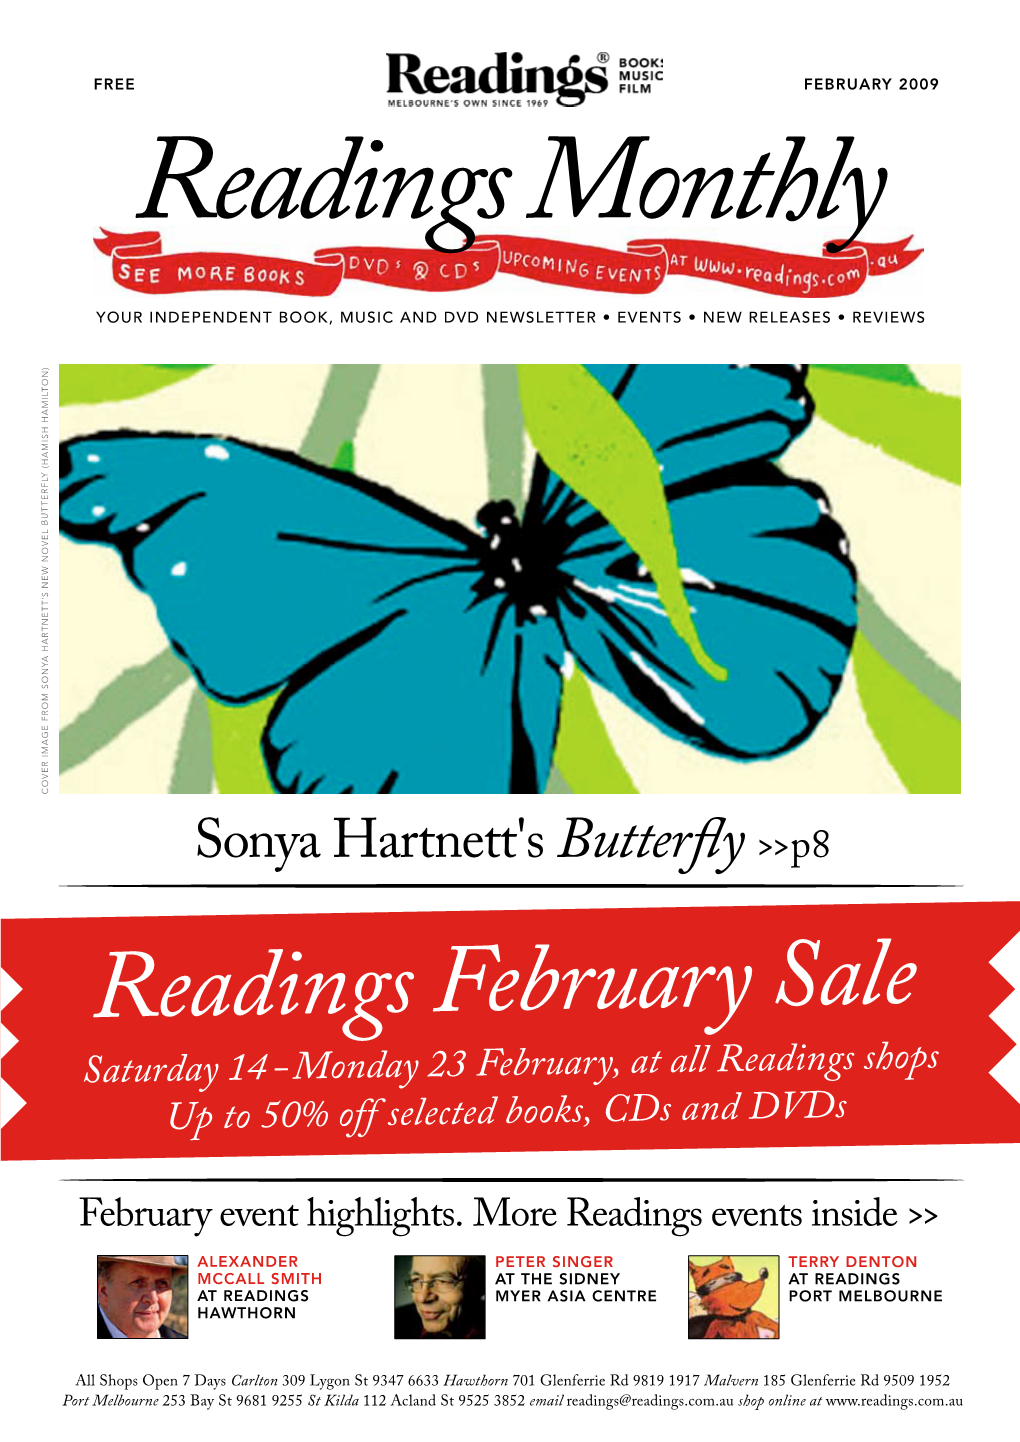 Readings February Sale Saturday 14 - Monday 23 February, at All Readings Shops up to 50% Off Selected Books, Cds and Dvds